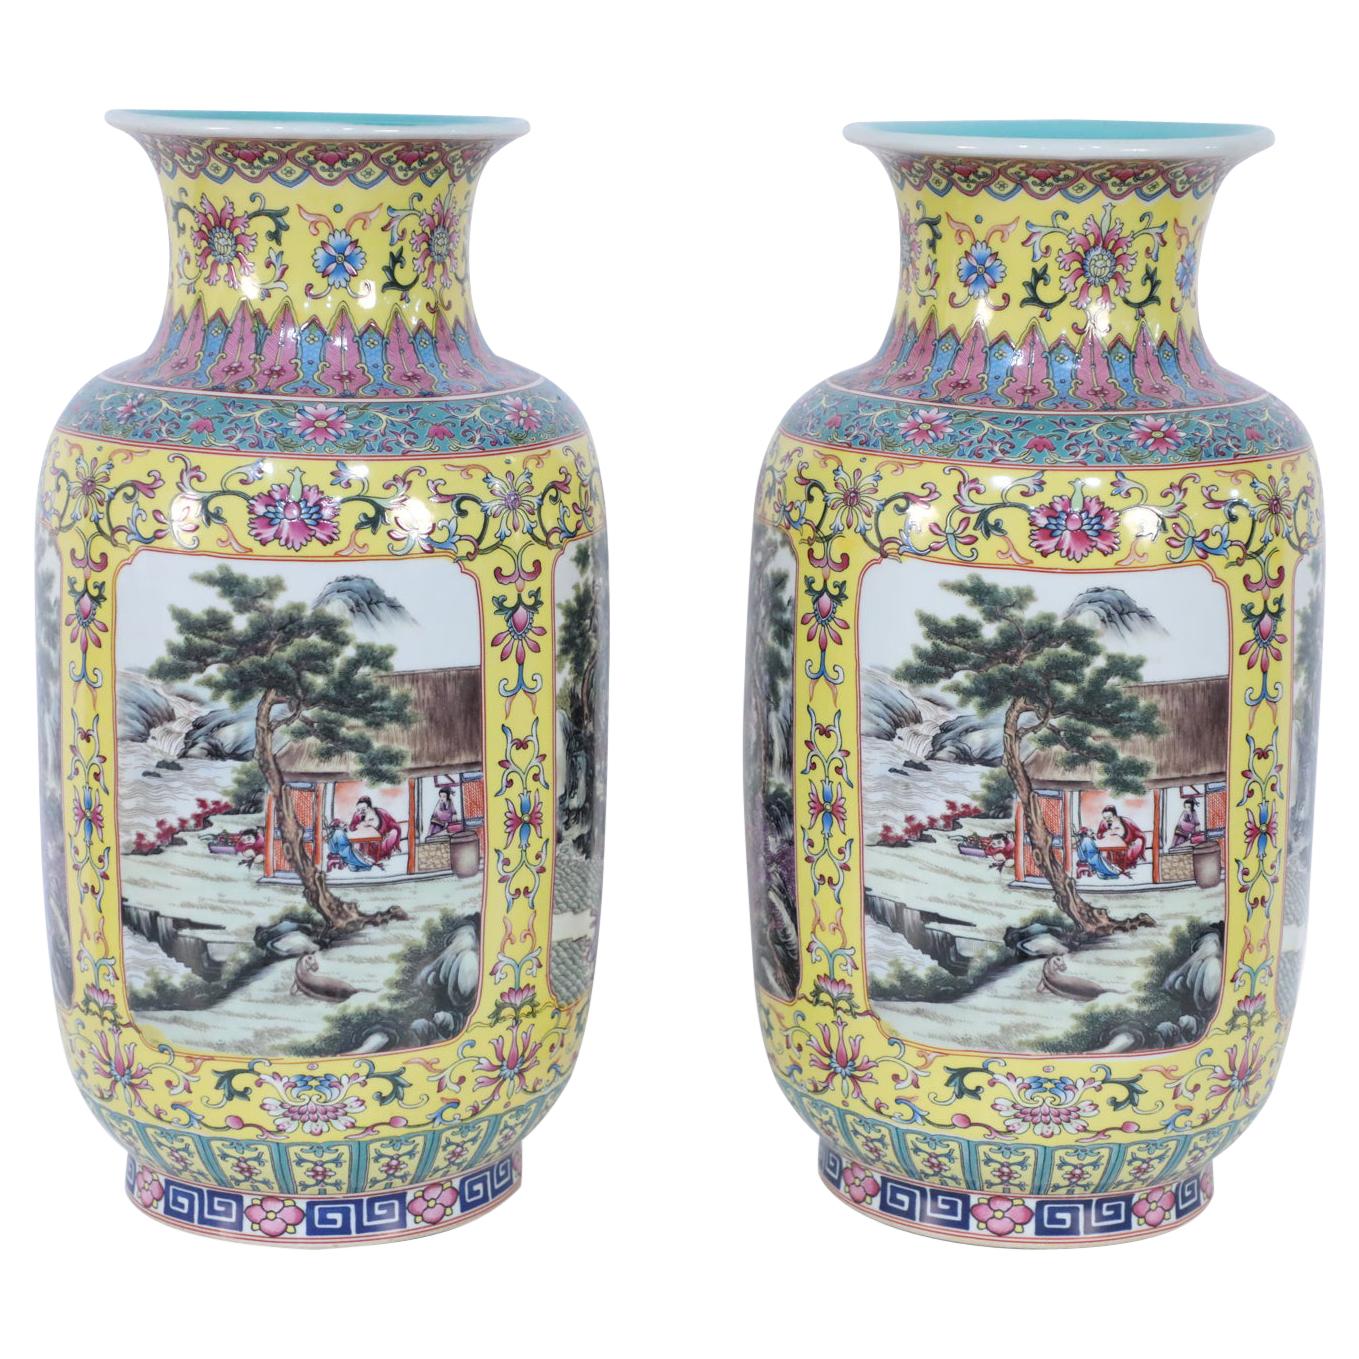 Pair of Chinese Yellow and Turquoise Genre Vignette Porcelain Vases